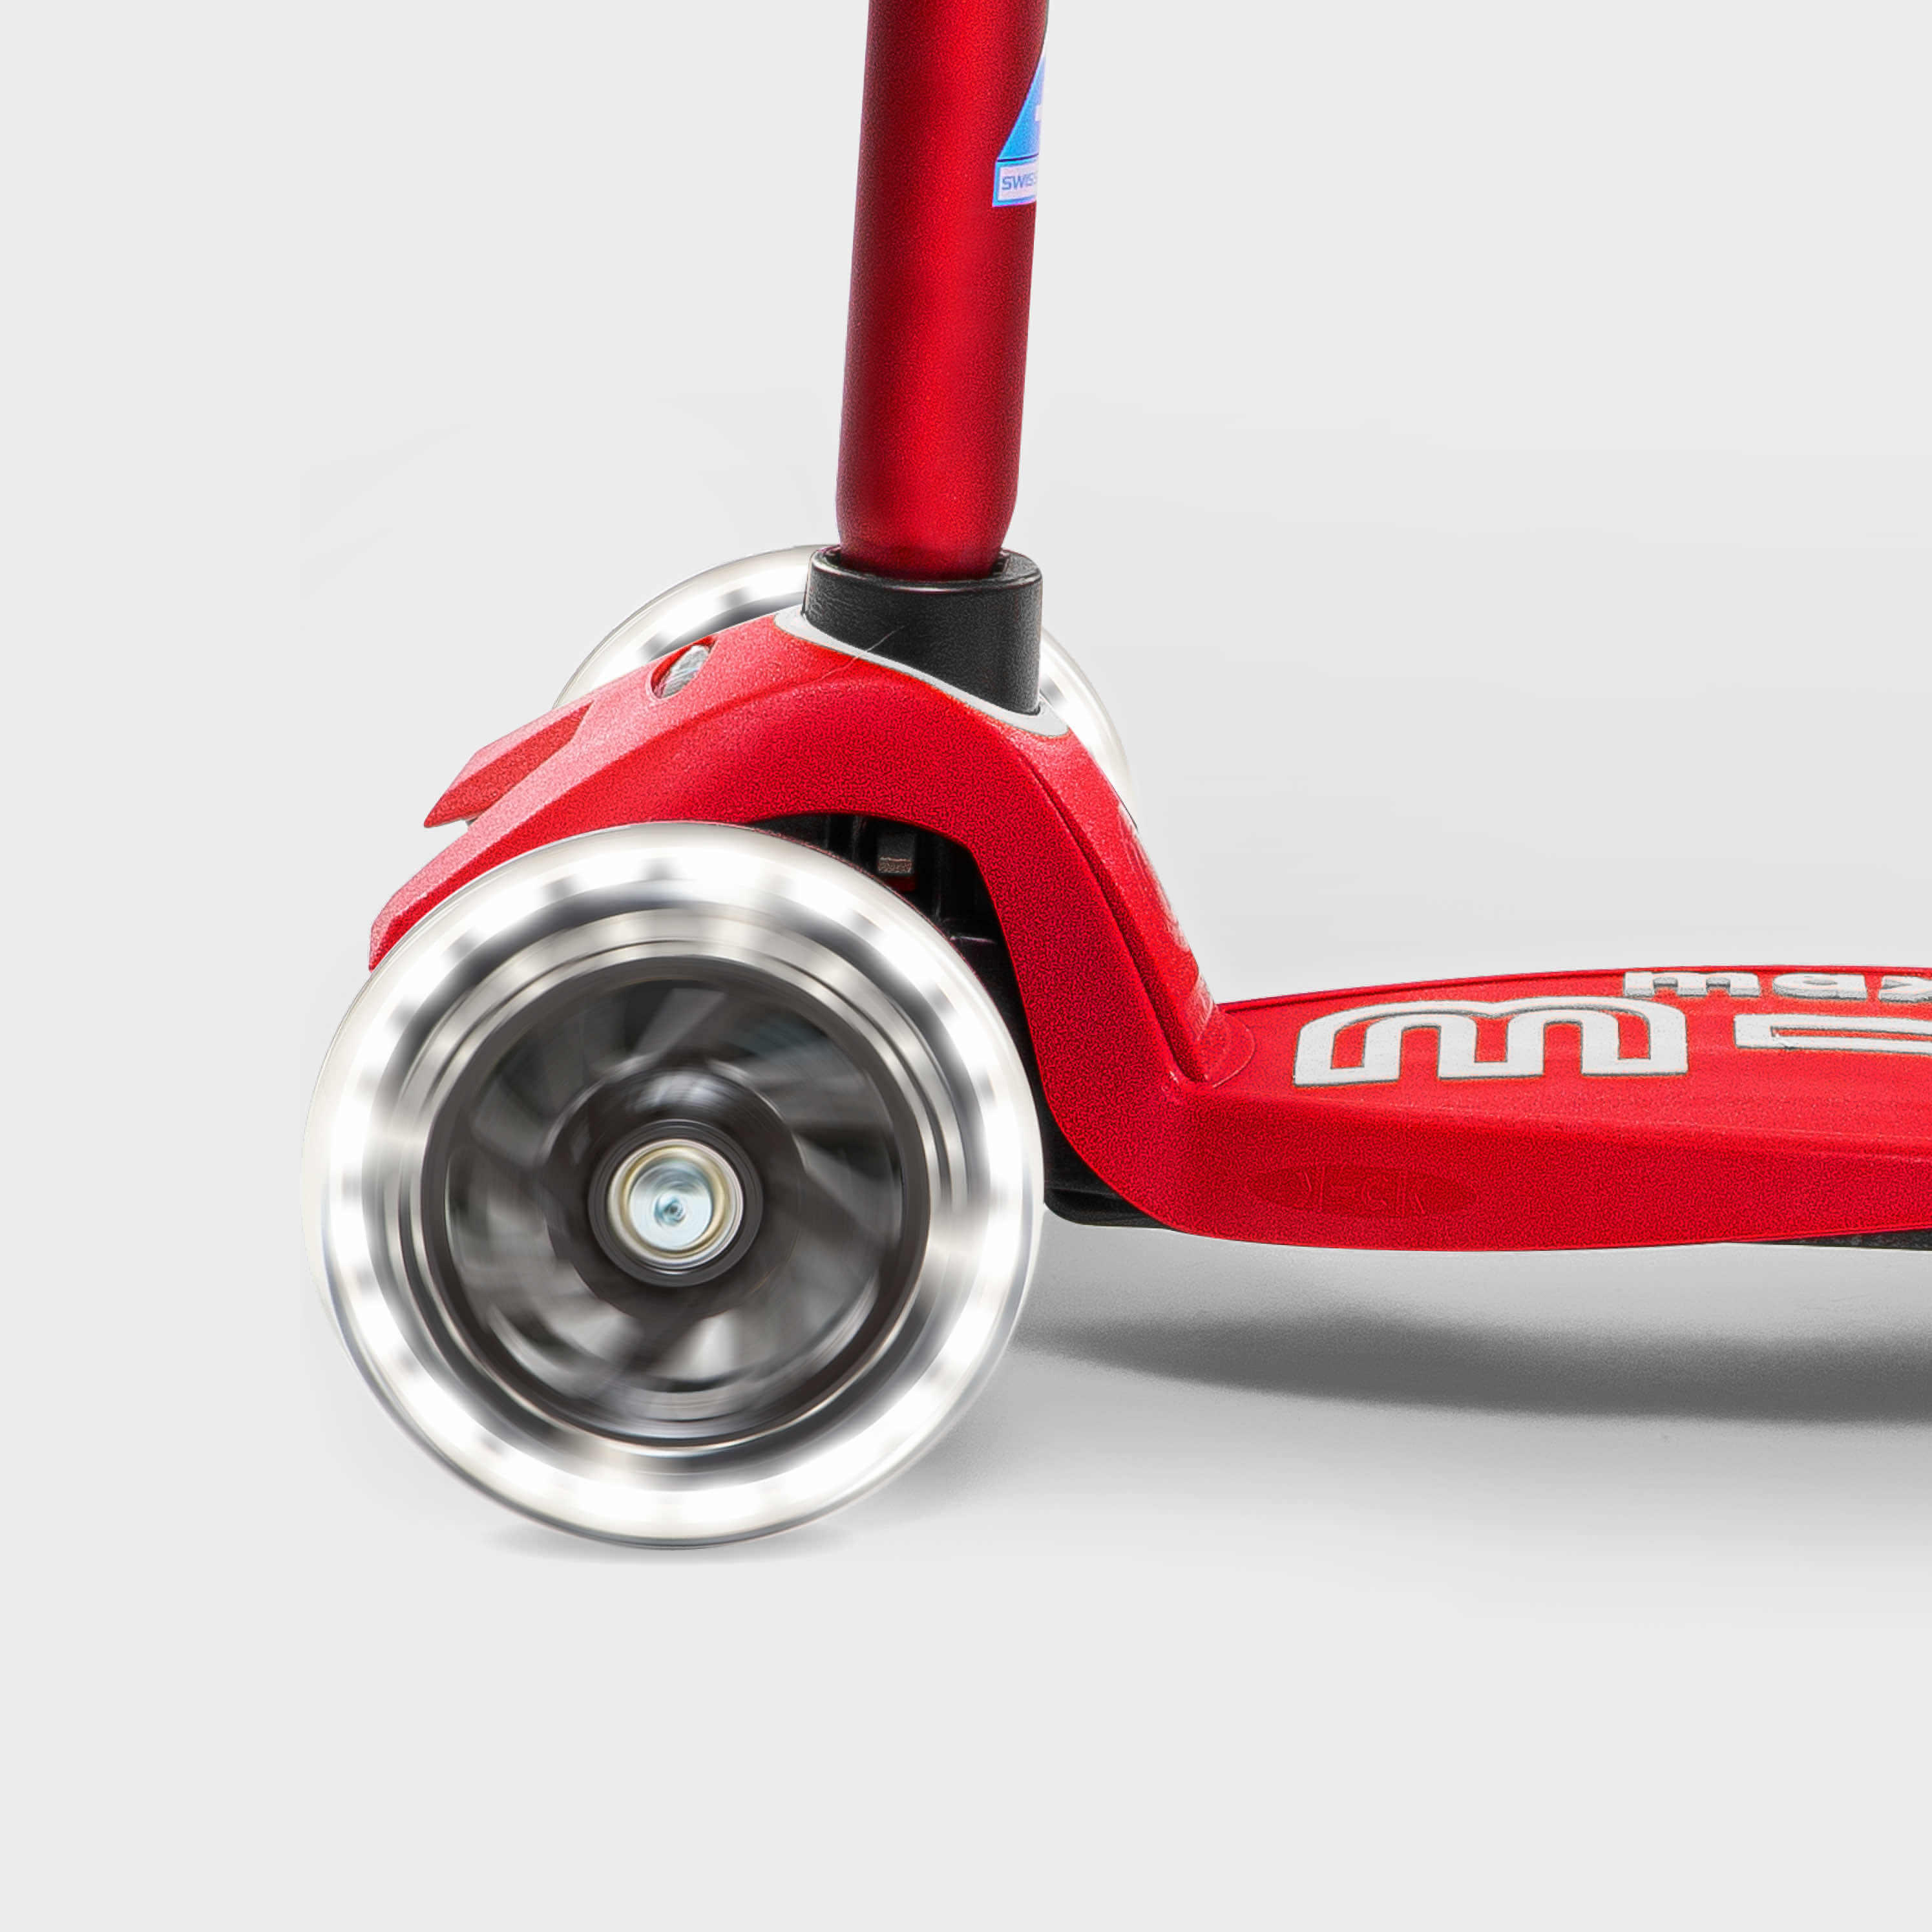 Maxi Scooter - Light up Wheels: Red 2/7